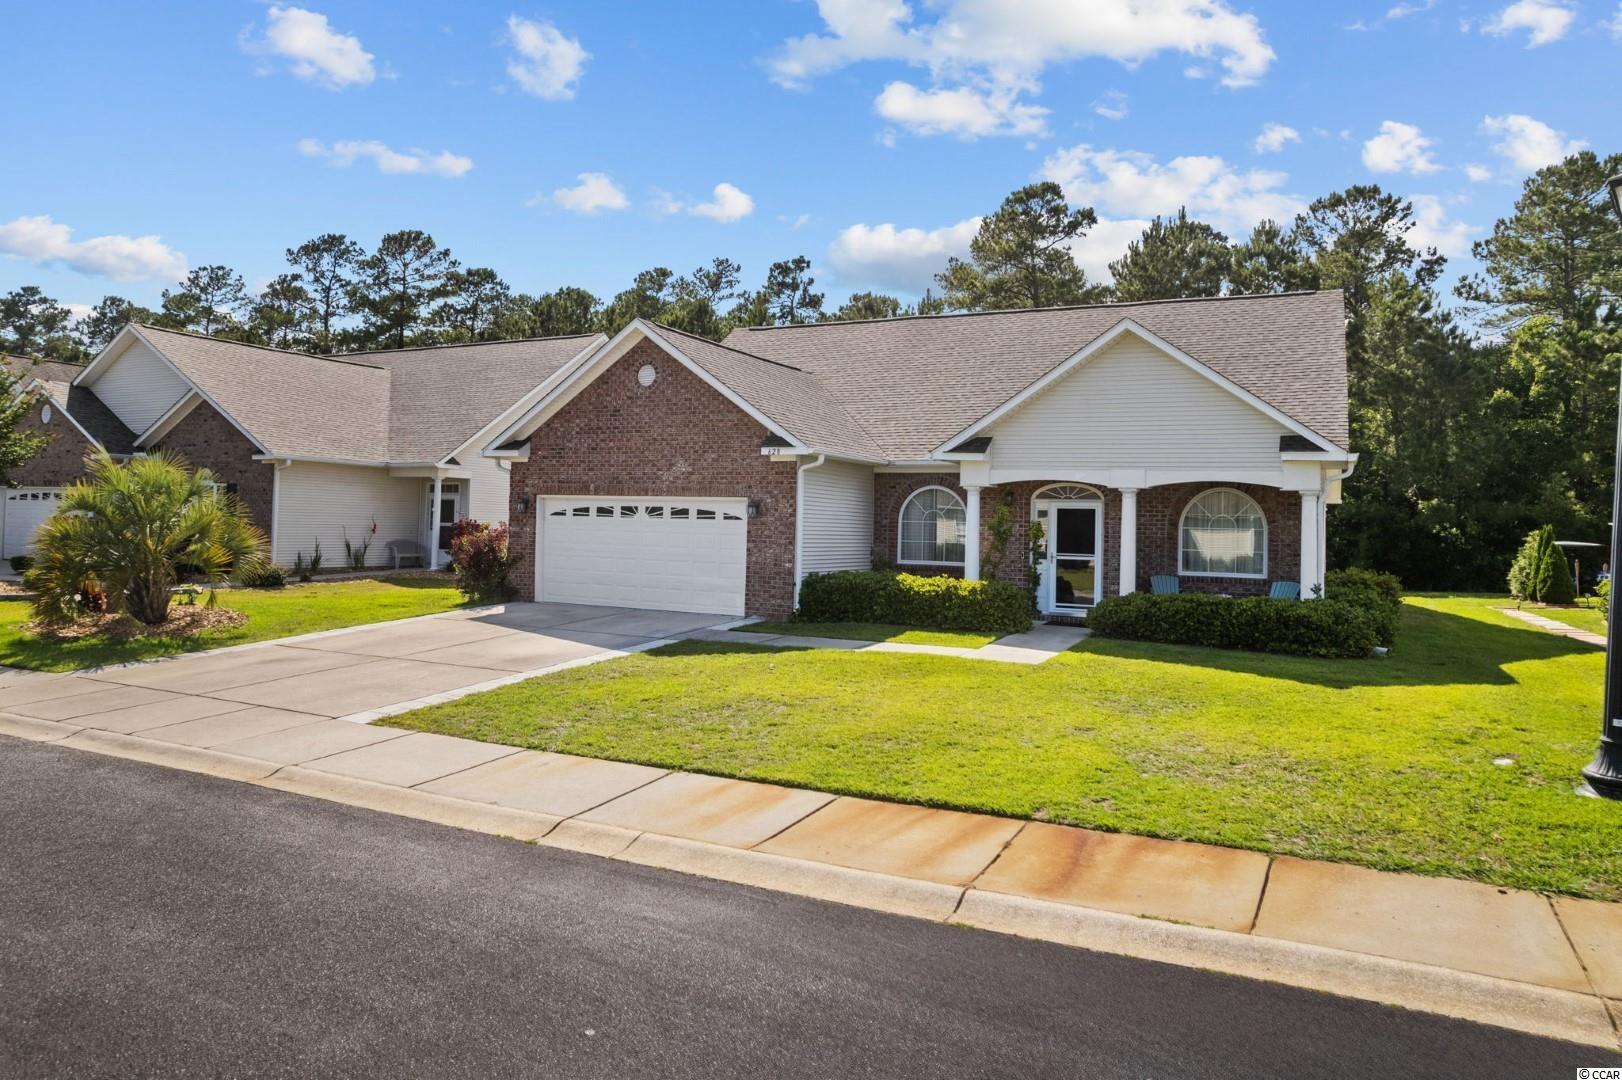 628 Tinkers Dr. Surfside Beach, SC 29575